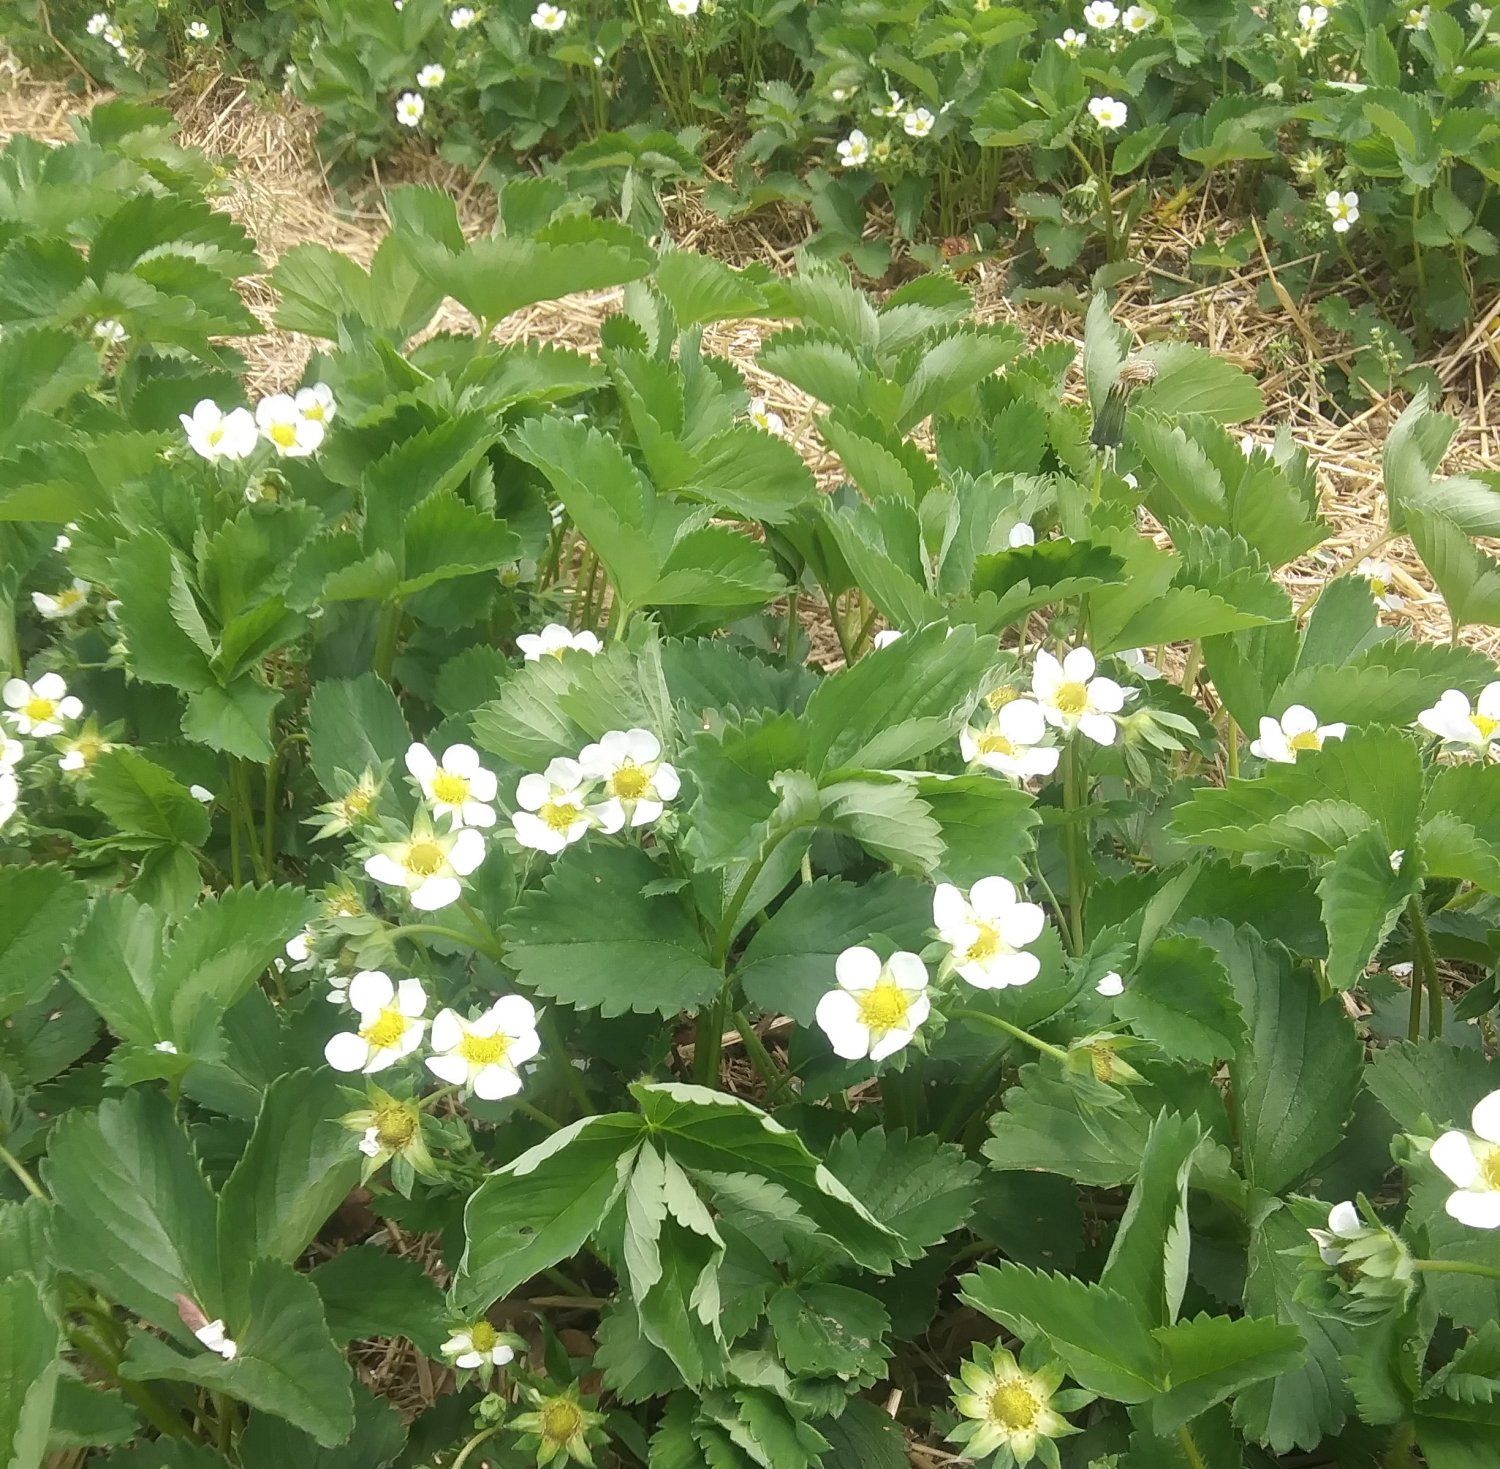 Blooming Strawberries and First Fresh Produce